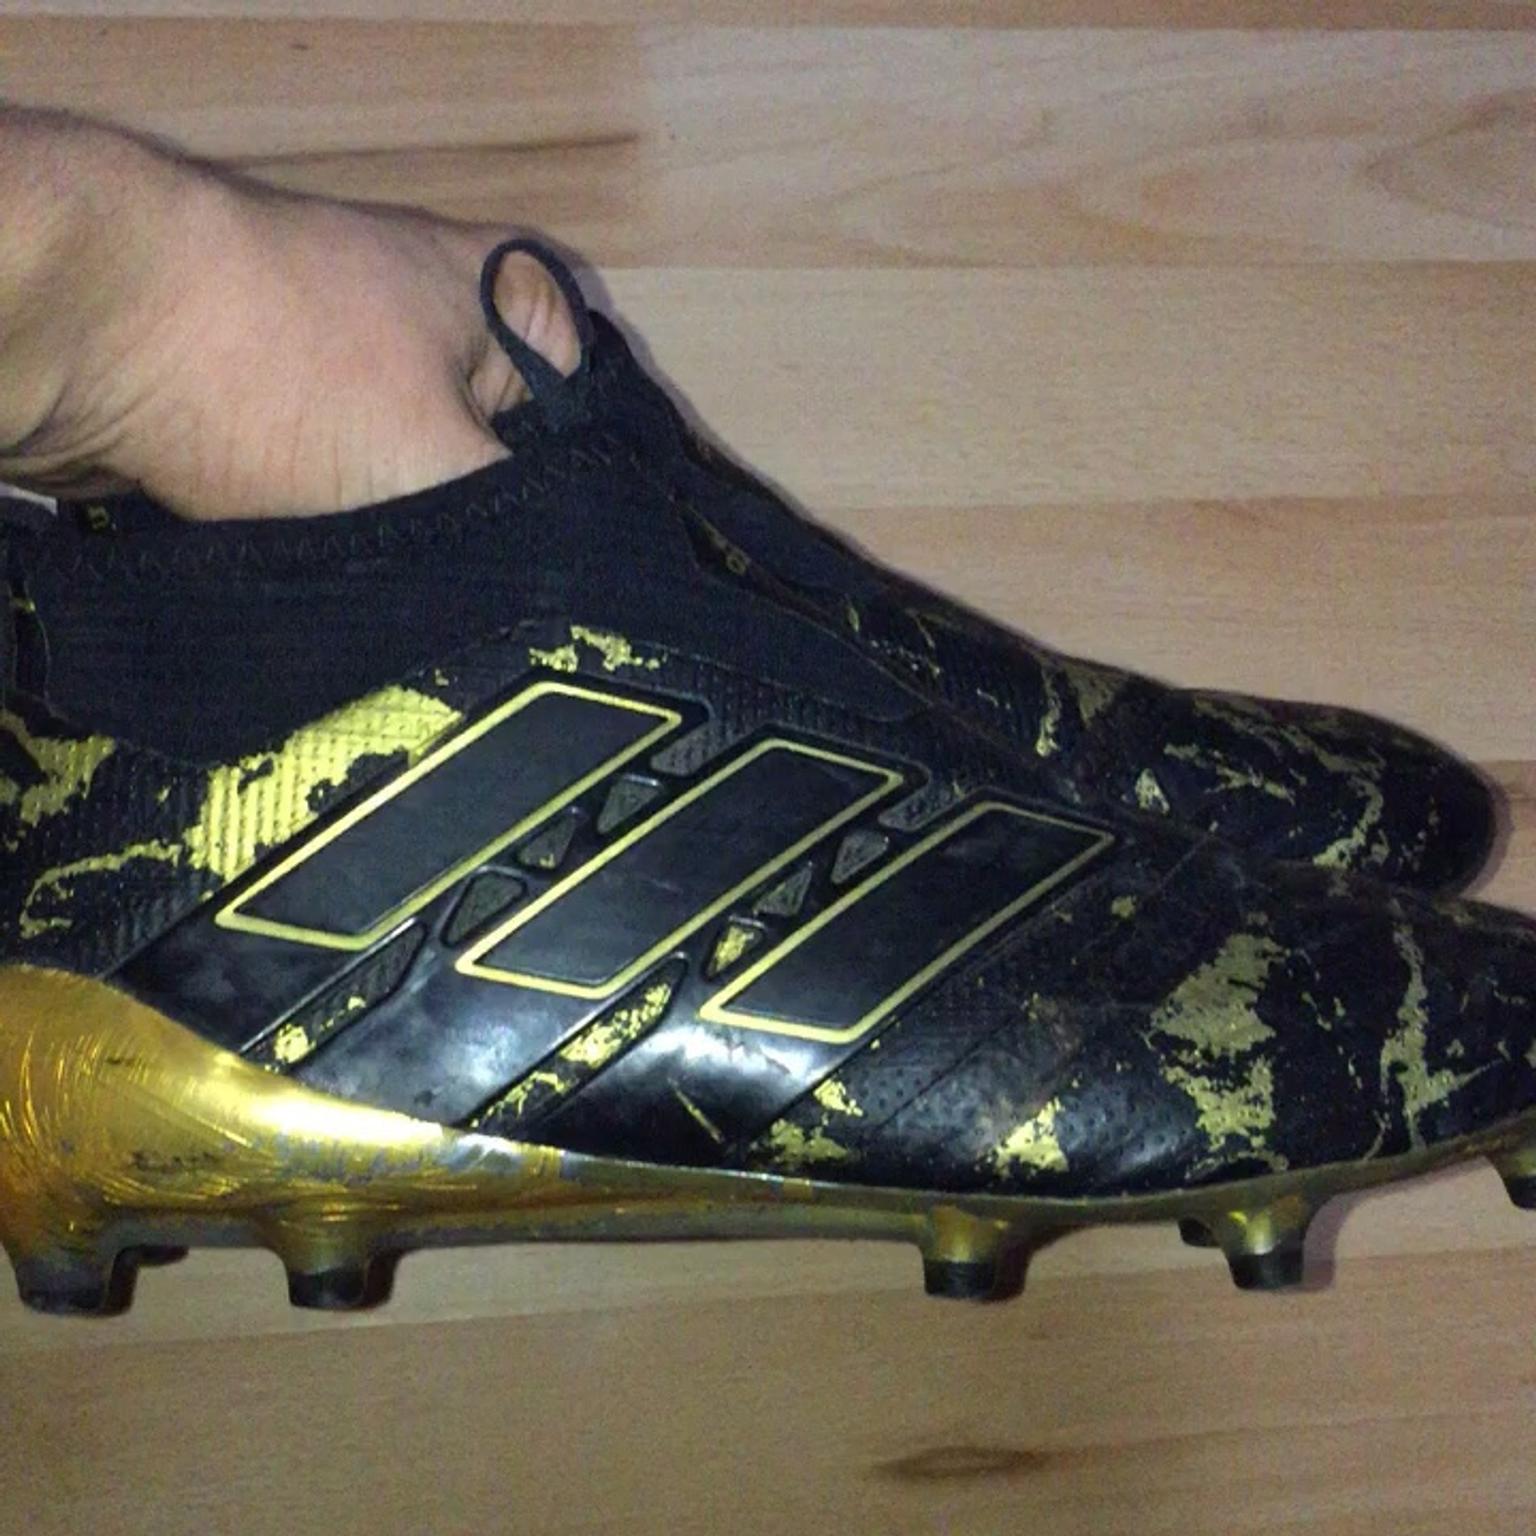 pogba limited edition boots